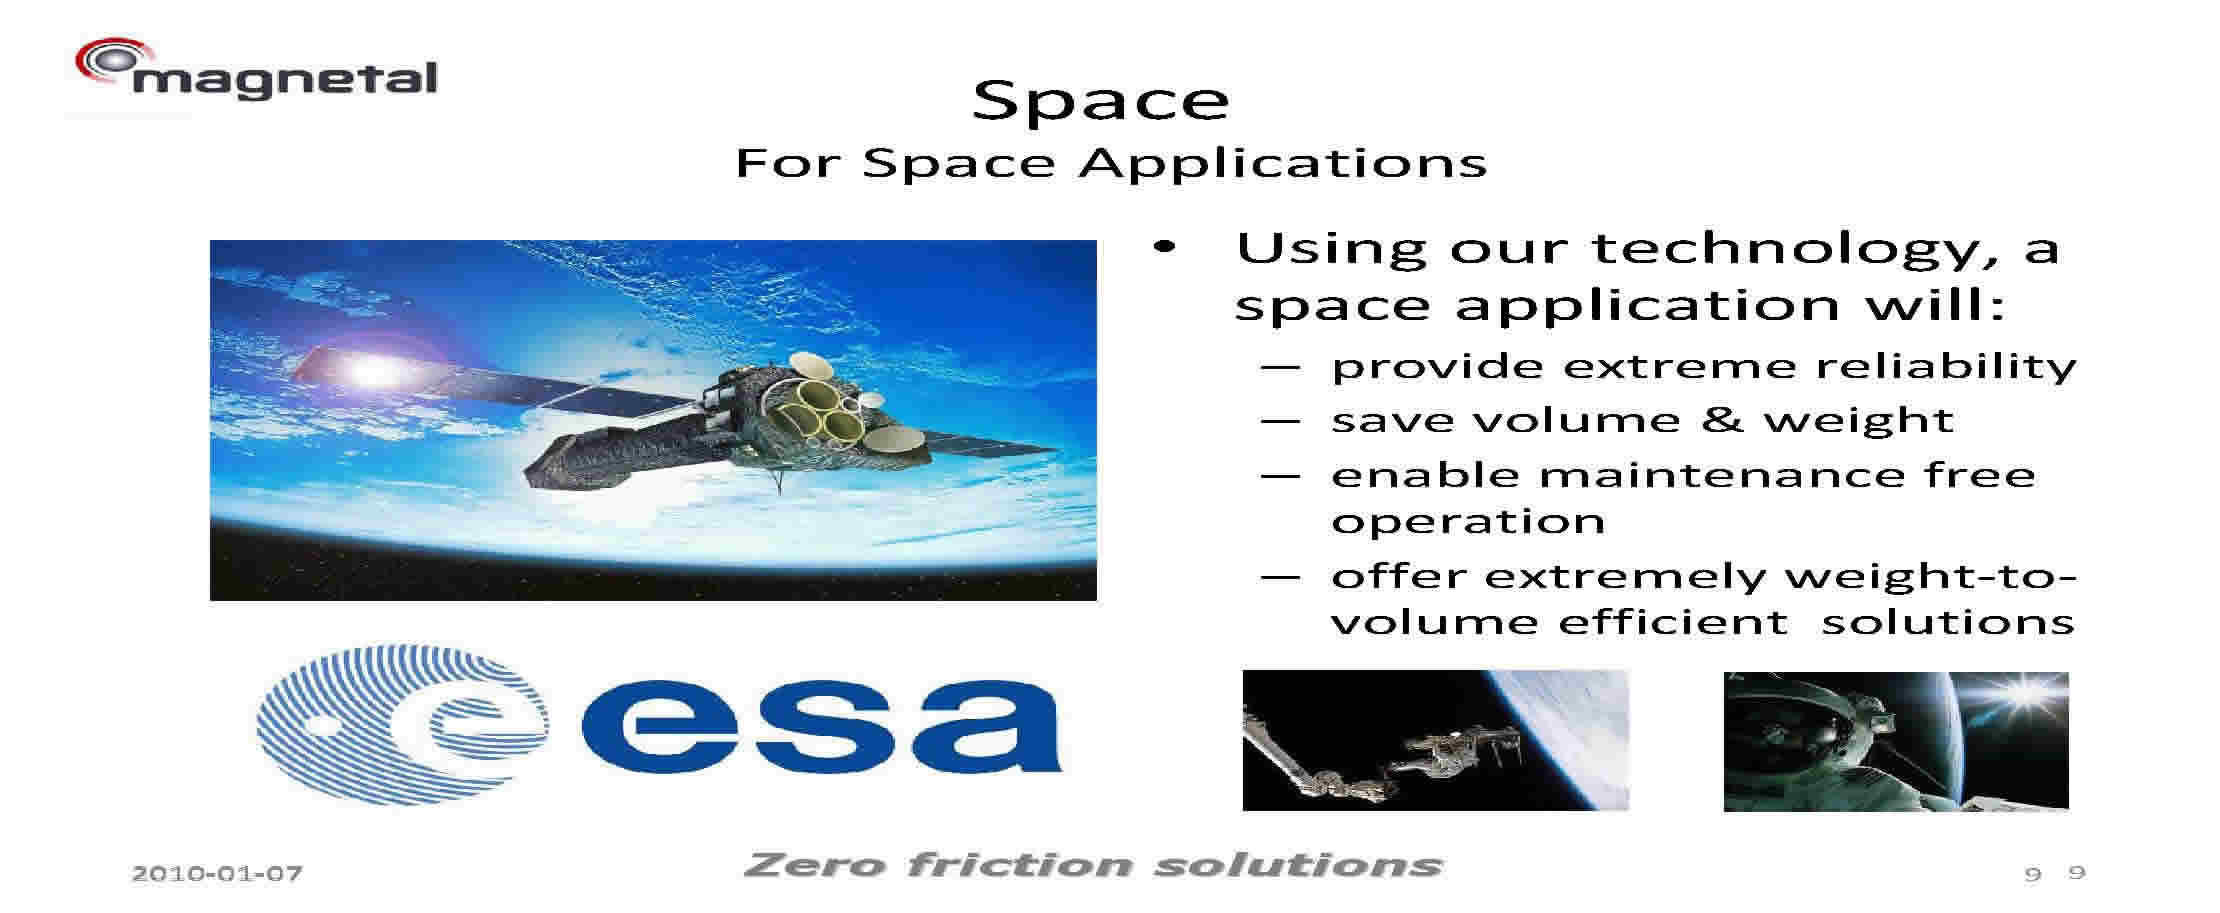 Added Value to Space Applications  Using Magnetal Passive Technology